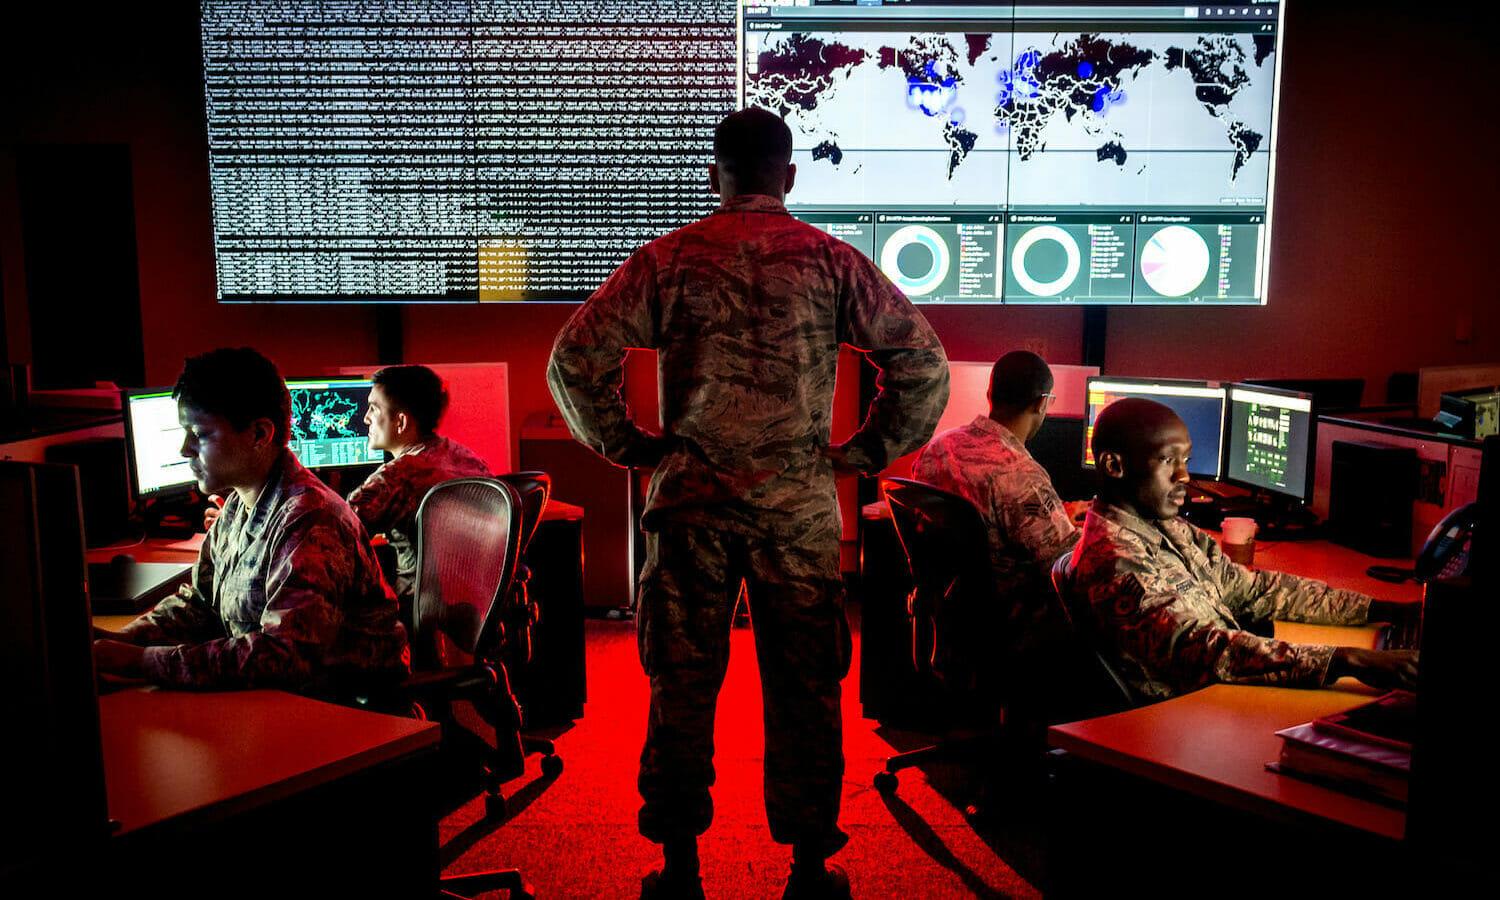 Cyber warfare specialists serving with the 175th Cyberspace Operations Group, which provides forces to a national mission team belonging to the U.S. Cyber Command, participate in training. (U.S. Air Force J.M. Eddins Jr.)